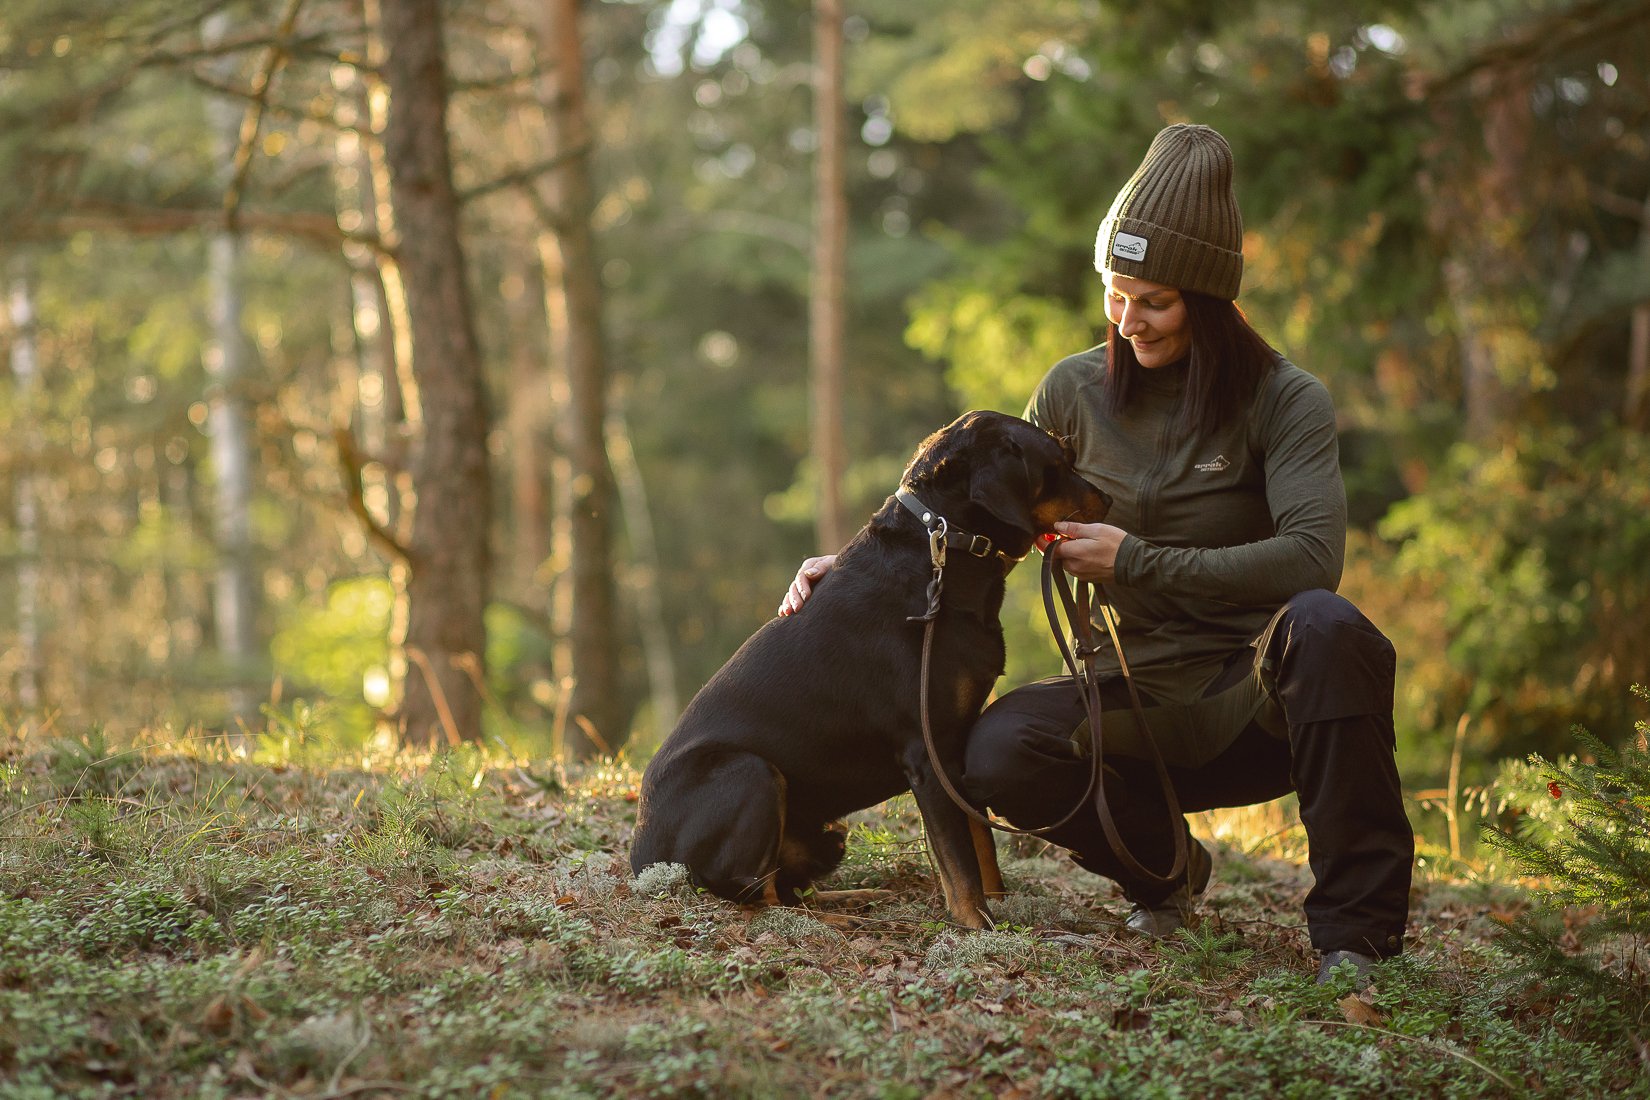 Arrak Outdoor USA  Clothing for the Modern Dog Owner